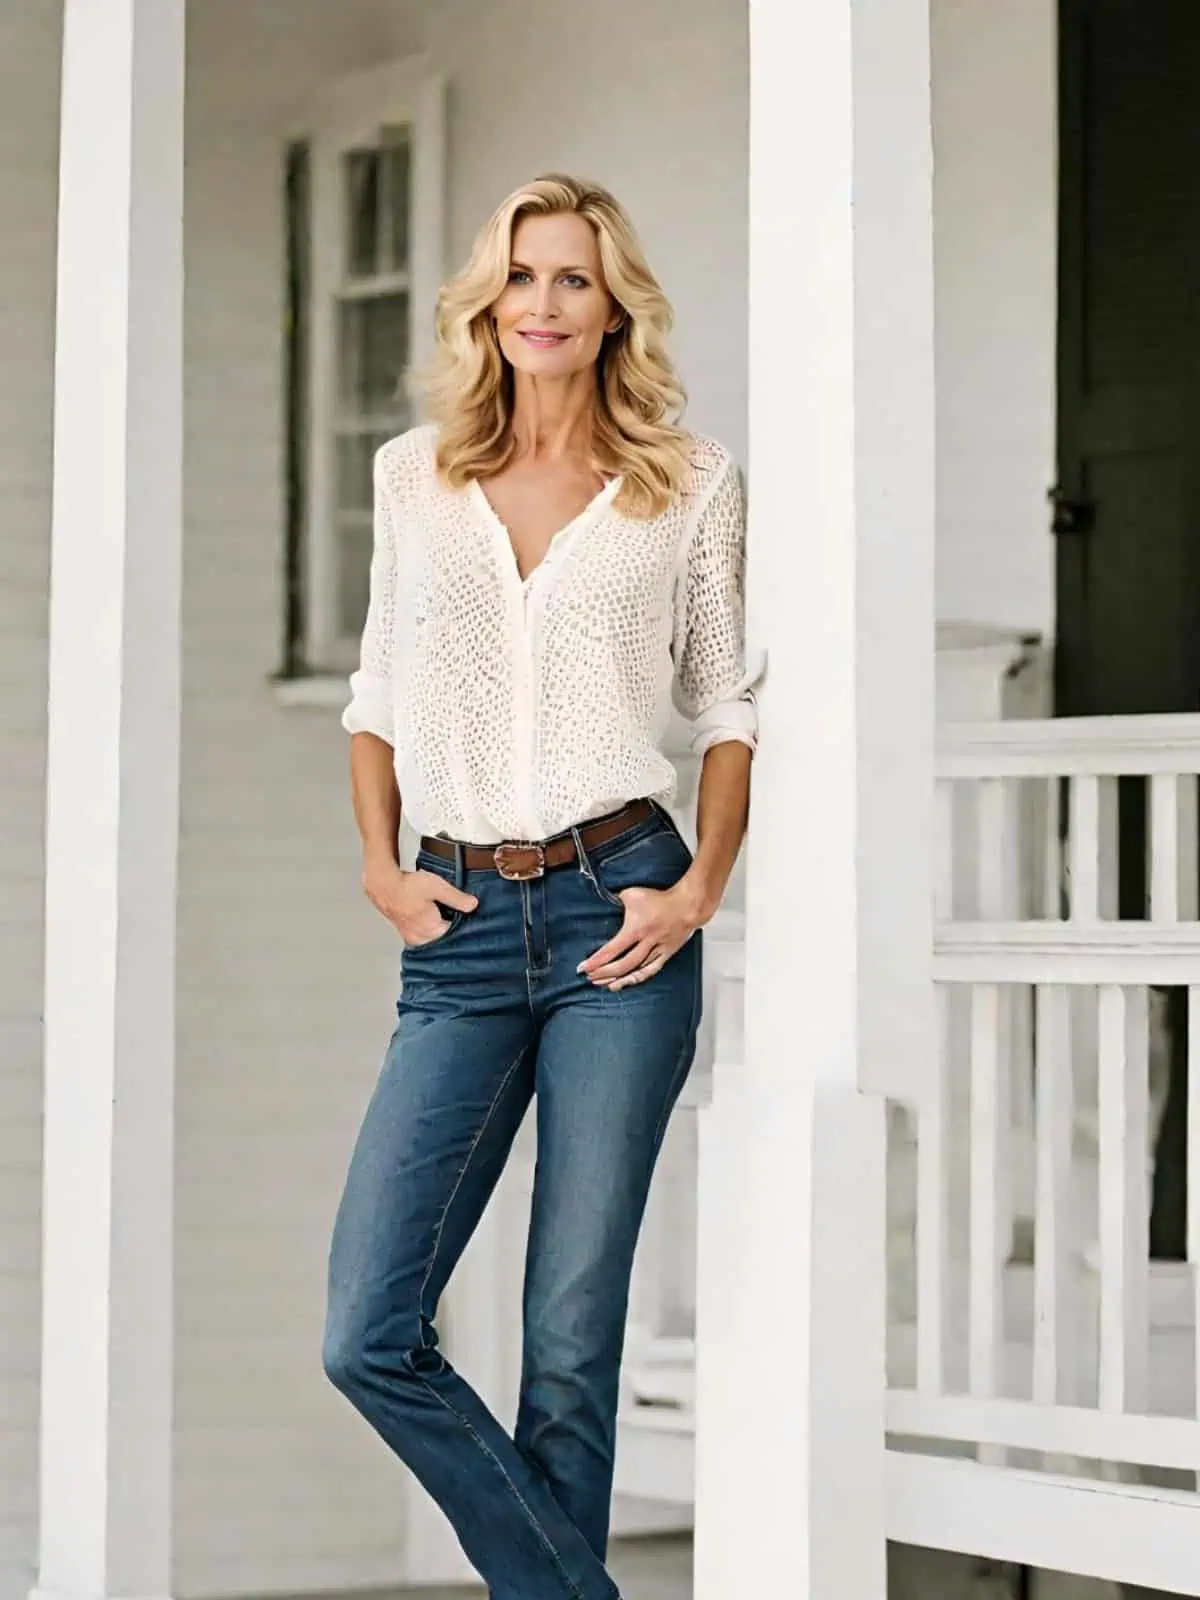 The Complete Jeans Guide for Women over 50 - Petite Dressing